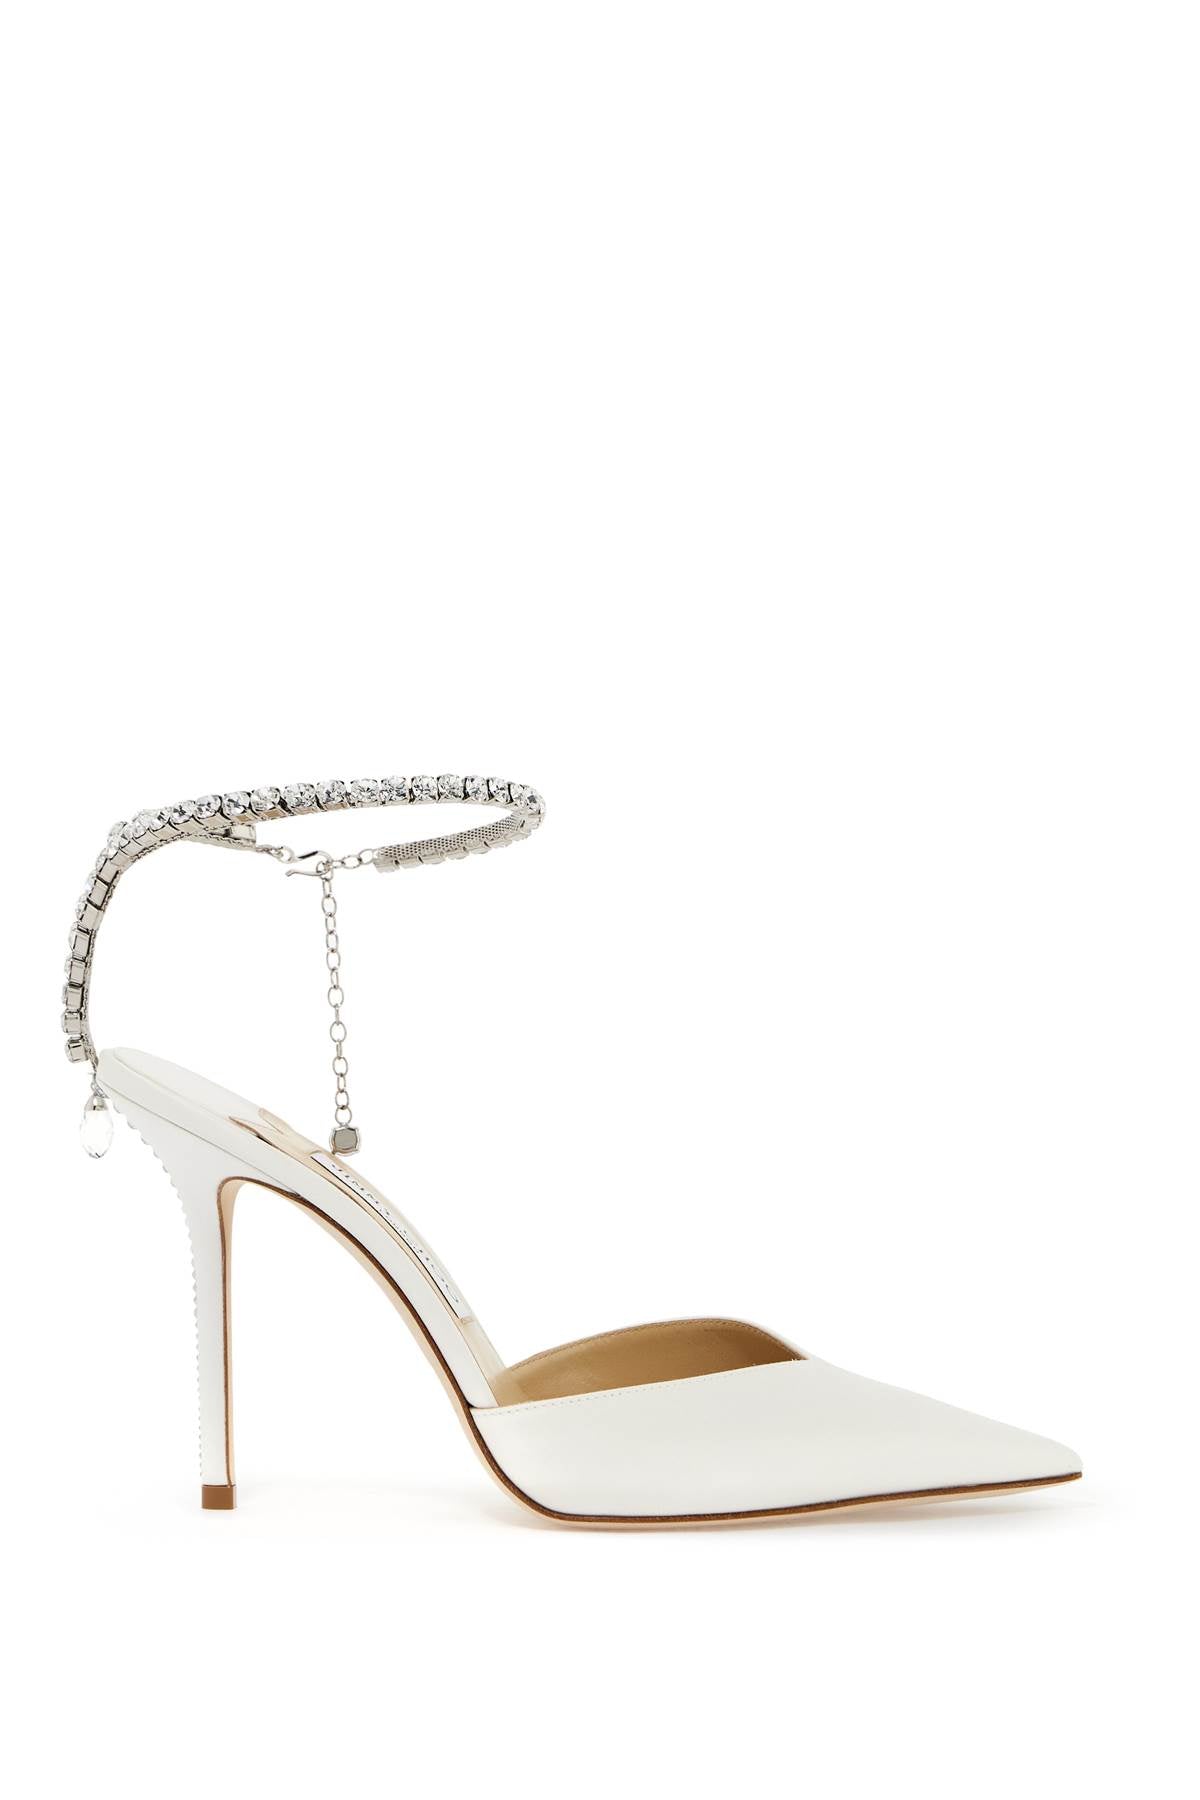 JIMMY CHOO White Satin Pumps with Crystal Ankle Strap and Rhinestone Stiletto Heel